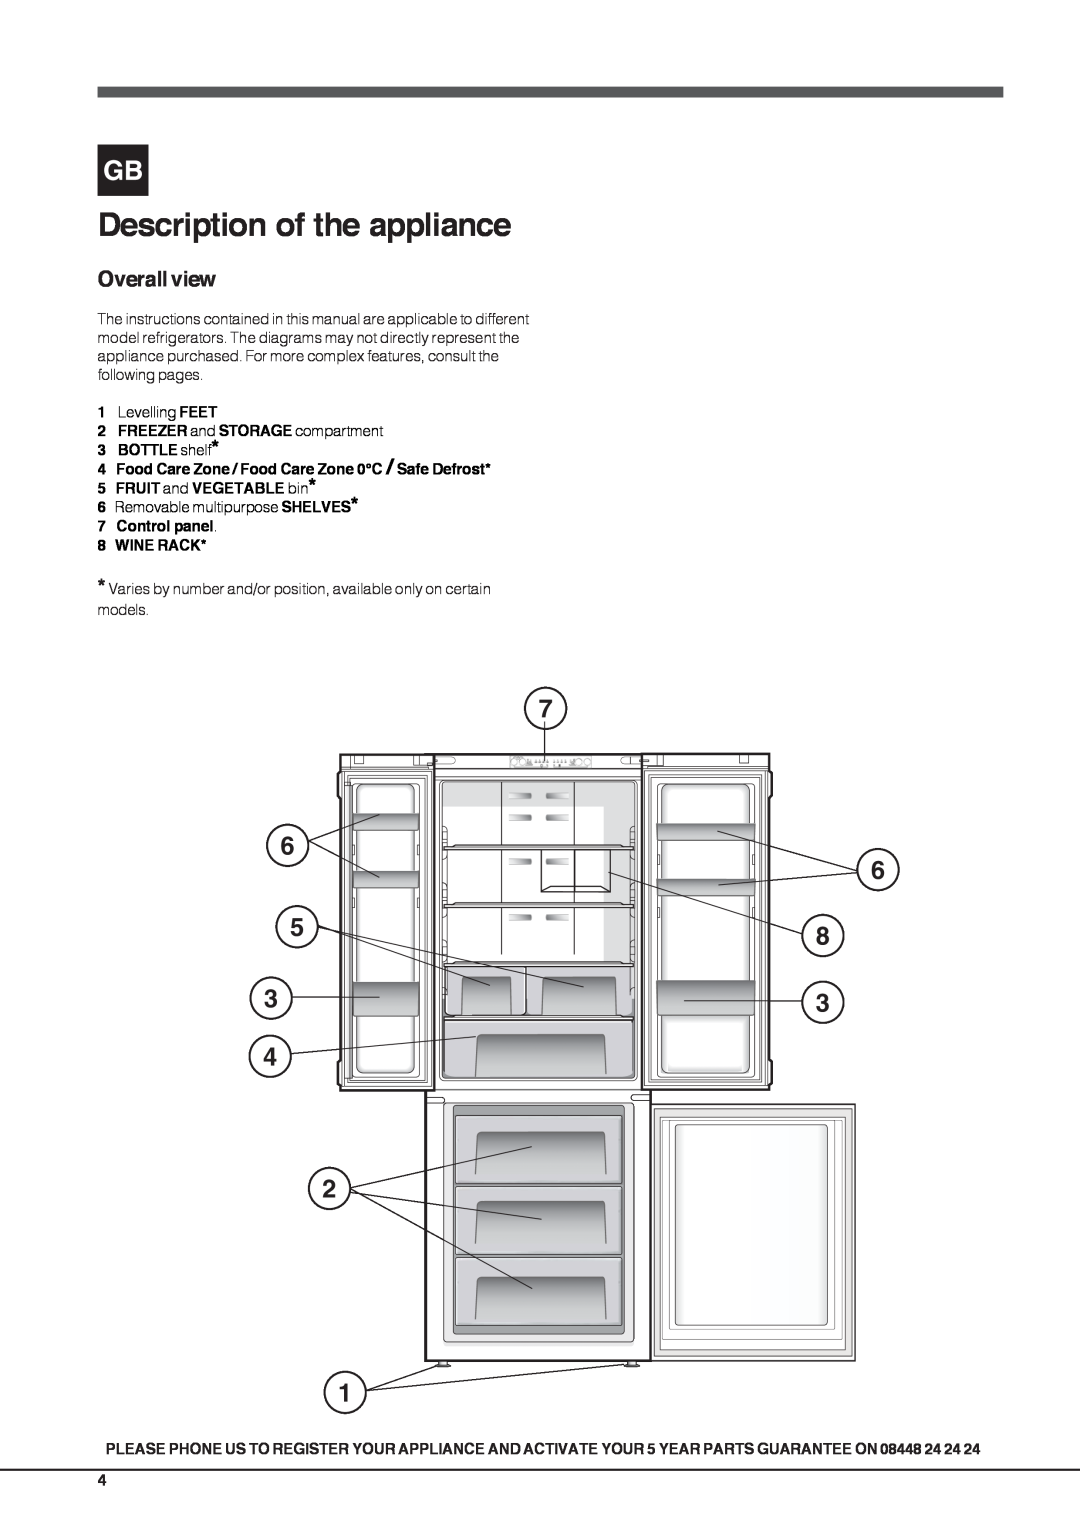 Hotpoint FFU3D W manual 7 6 5, Description of the appliance, 2FREEZER and STORAGE compartment 3BOTTLE shelf 